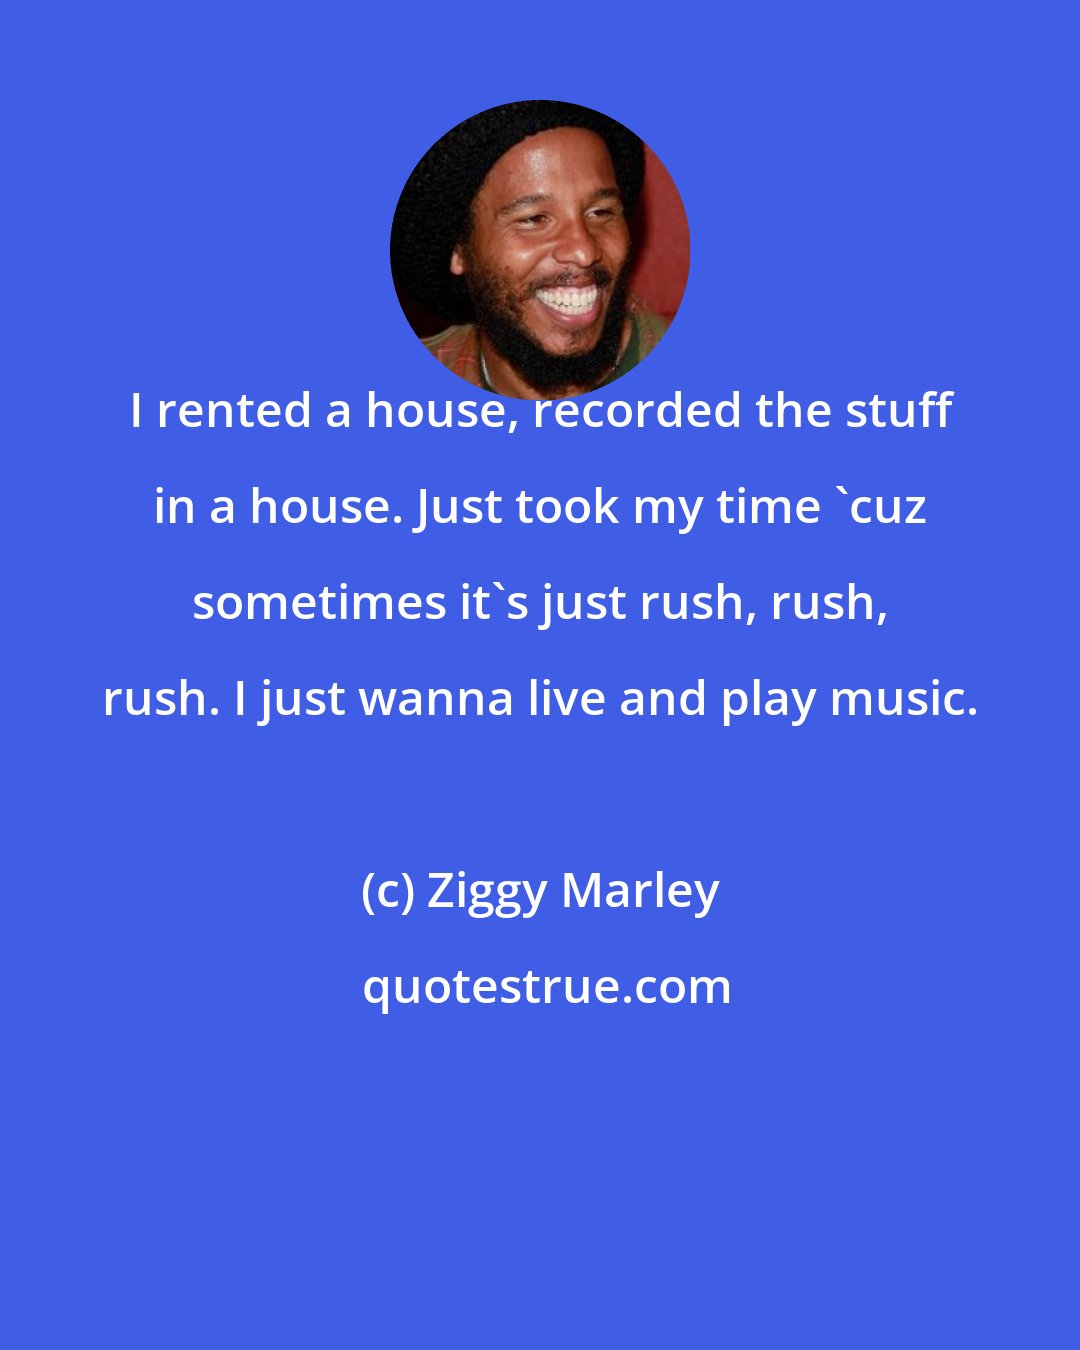 Ziggy Marley: I rented a house, recorded the stuff in a house. Just took my time 'cuz sometimes it's just rush, rush, rush. I just wanna live and play music.